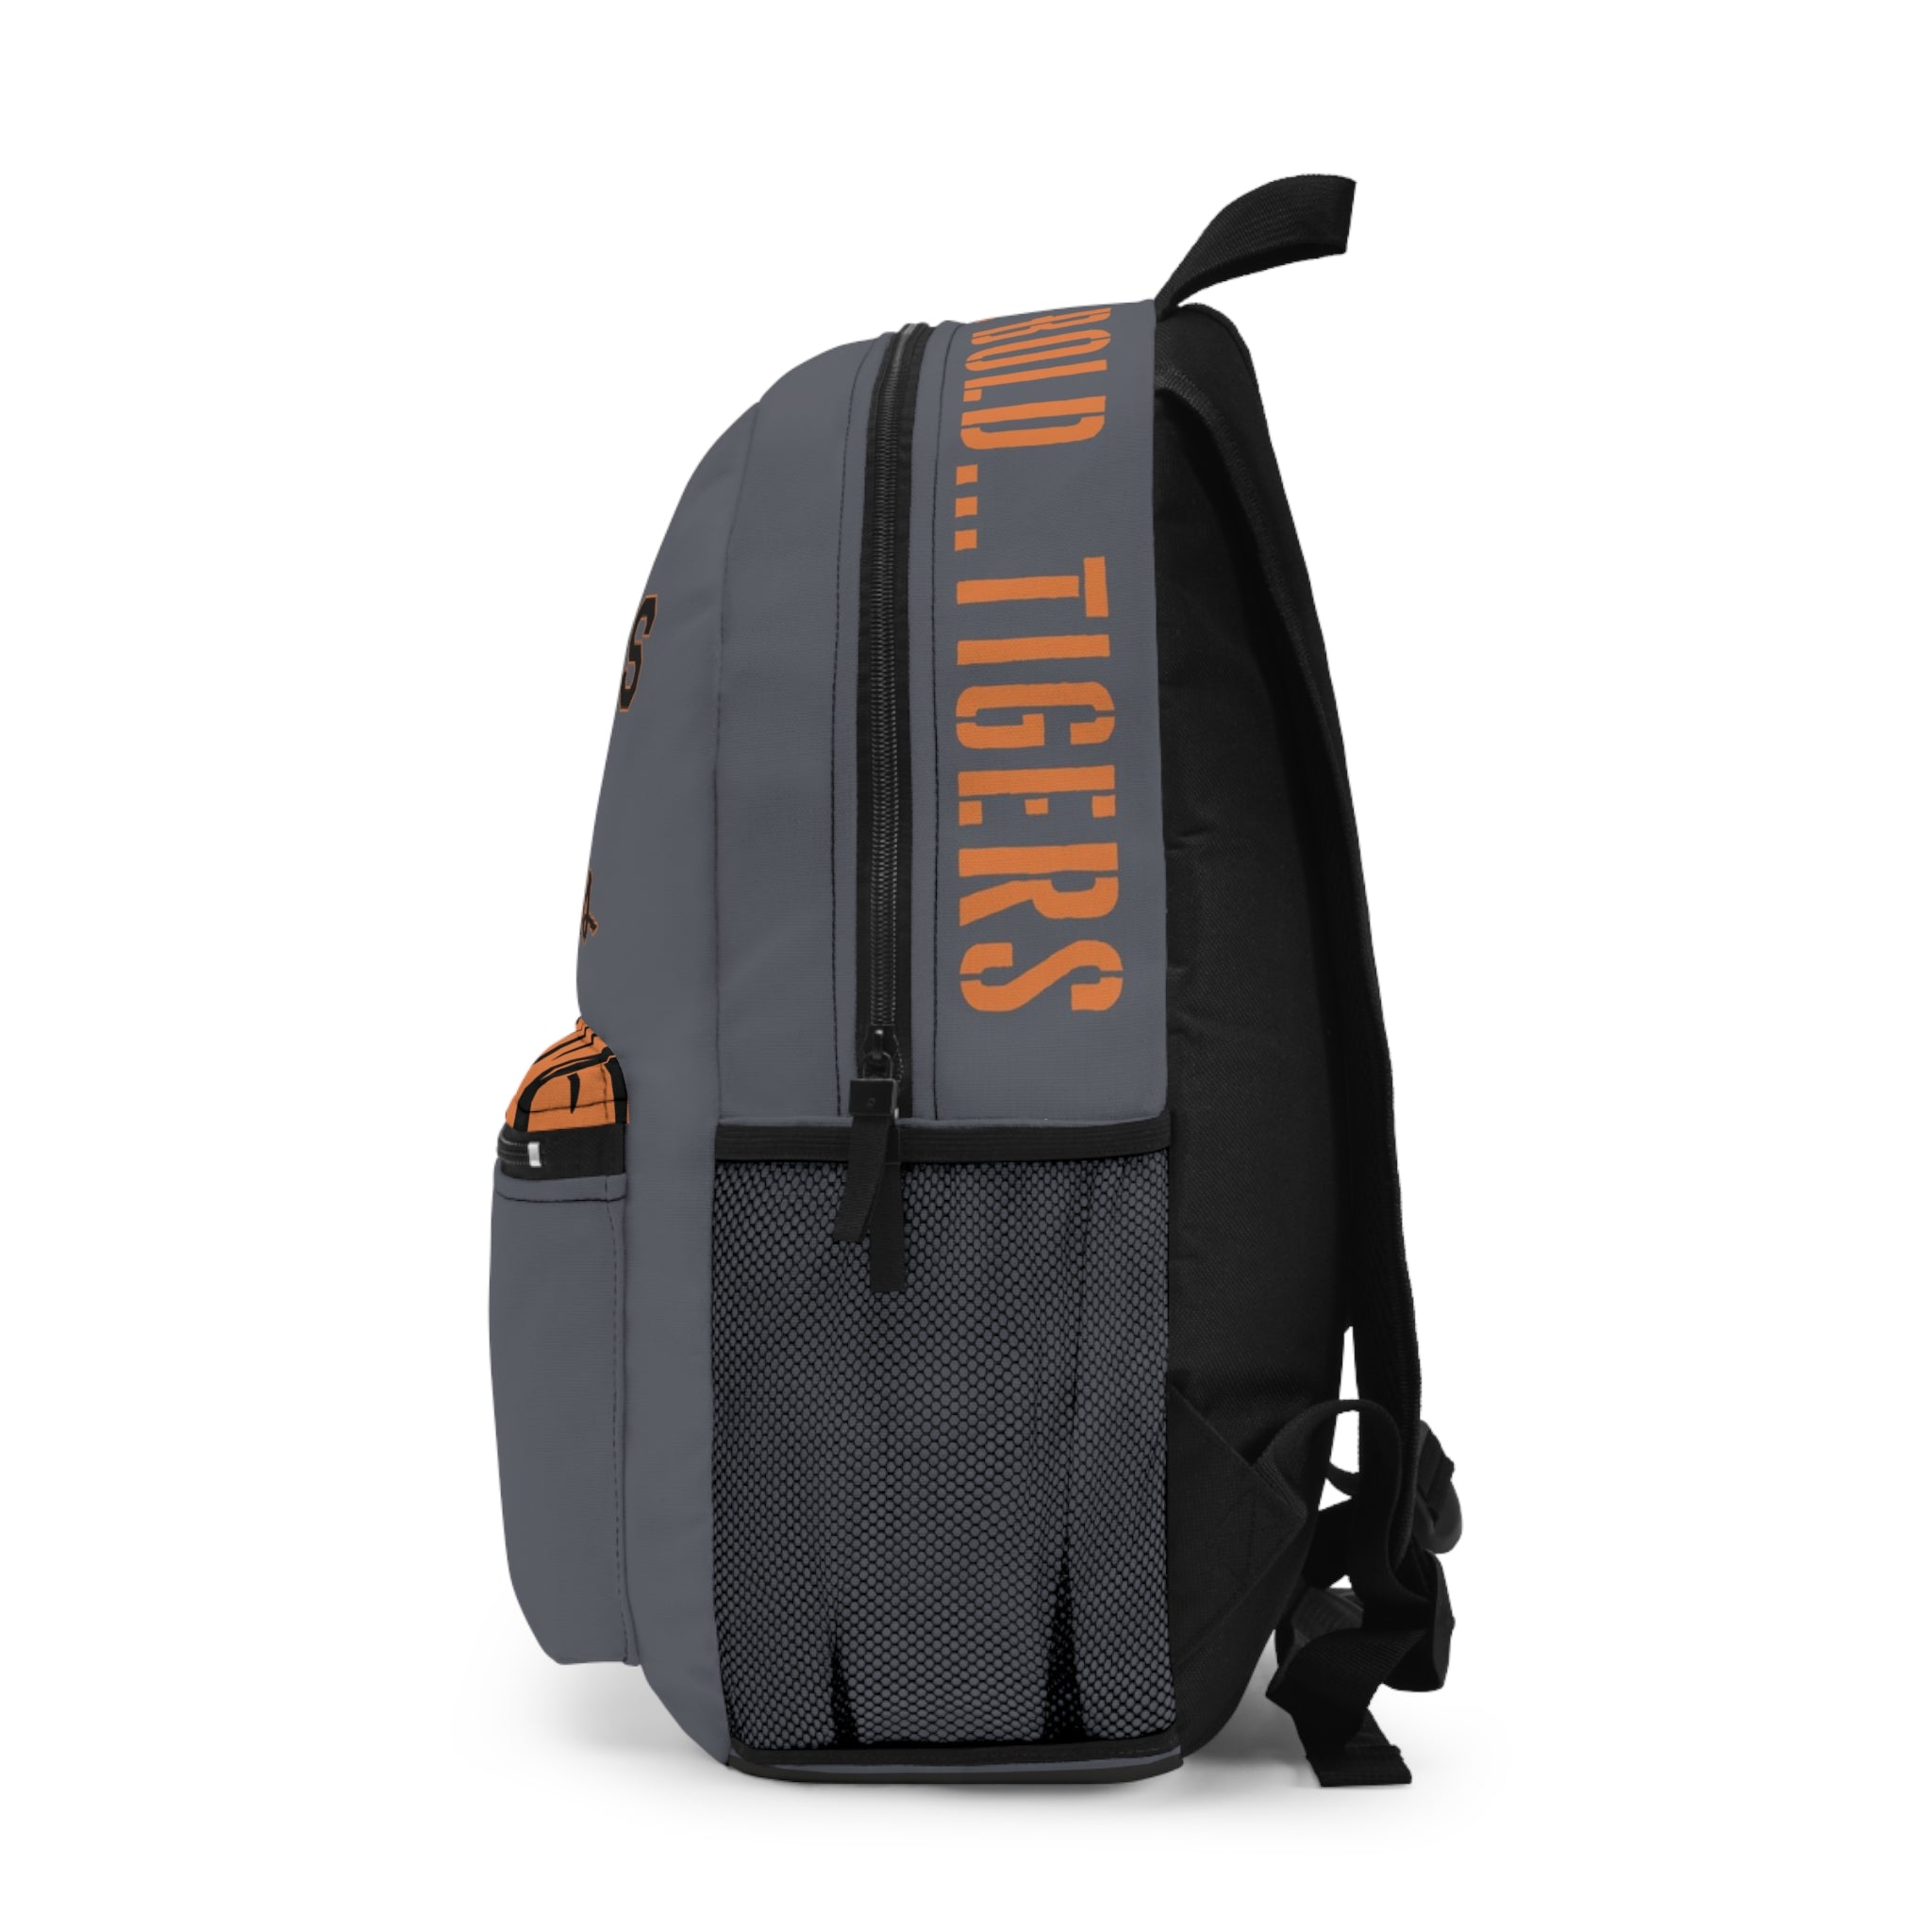 F-15  "Bold Tigers" Backpack - Billy The Kid Edition - I Love a Hangar